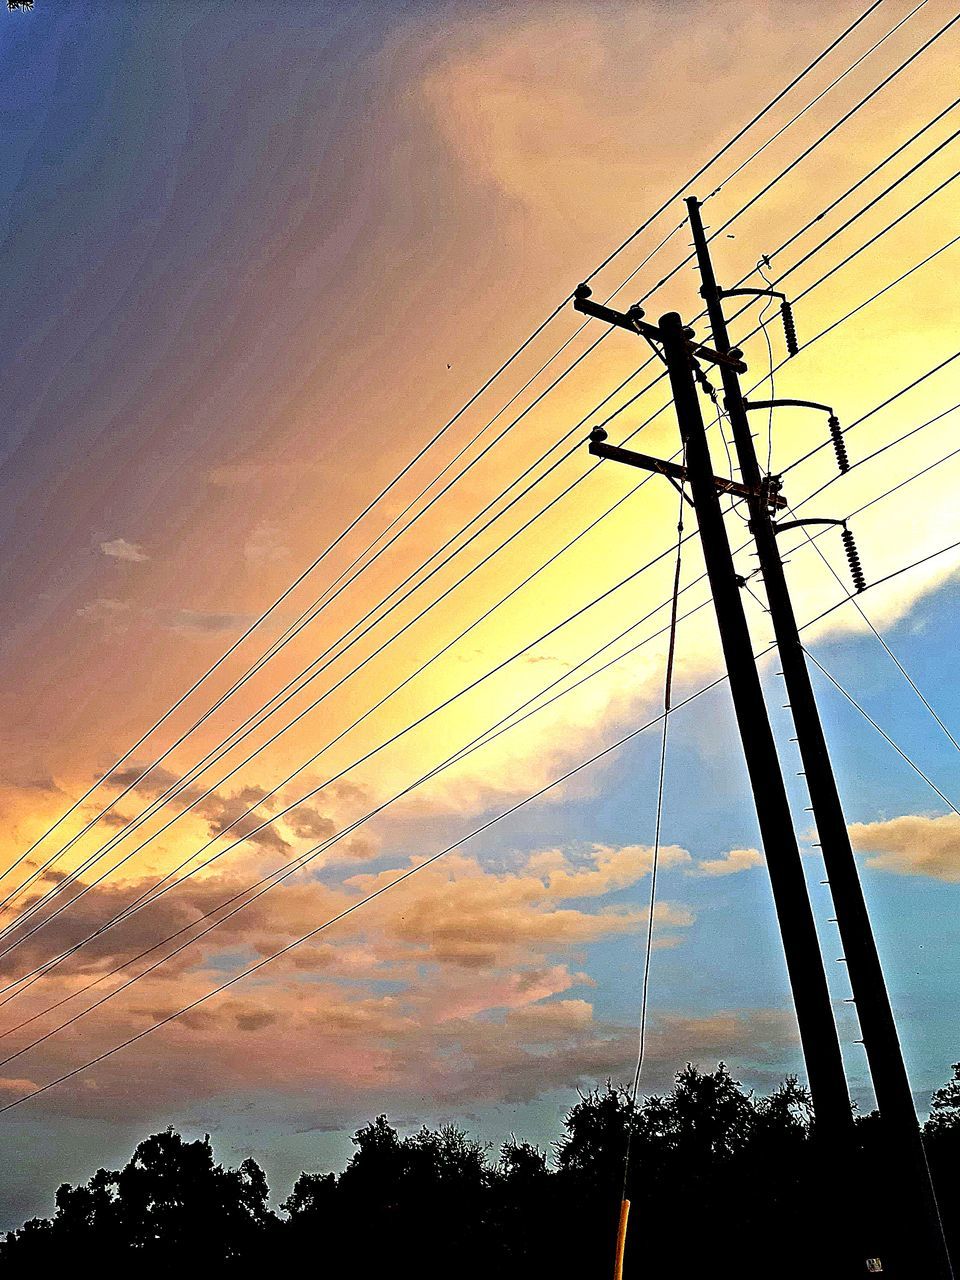 cable, electricity, sky, technology, sunset, electricity pylon, power supply, power line, power generation, silhouette, cloud, nature, low angle view, no people, afterglow, overhead power line, orange color, dusk, beauty in nature, outdoors, tree, scenics - nature, dramatic sky, plant, landscape, environment, transmission tower, architecture, line, sunlight, public utility, evening, communication, built structure